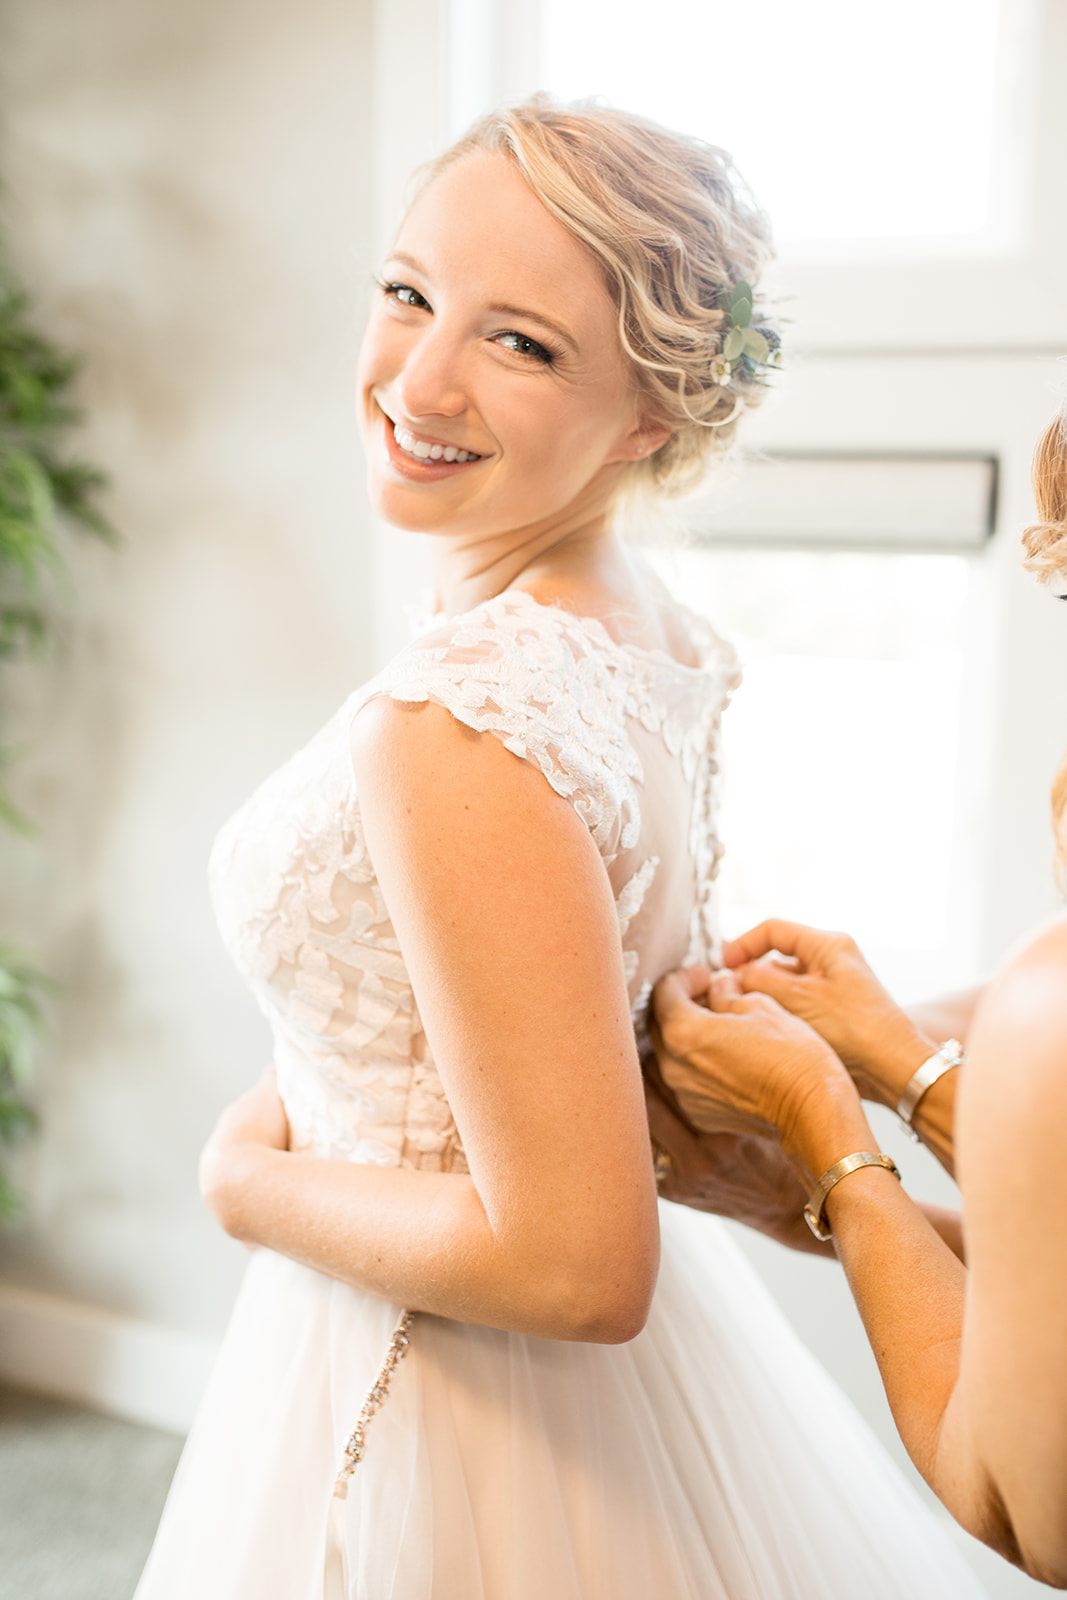 The most common mistake brides make on their timeline and how to avoid it - Image Property of www.j-dphoto.com